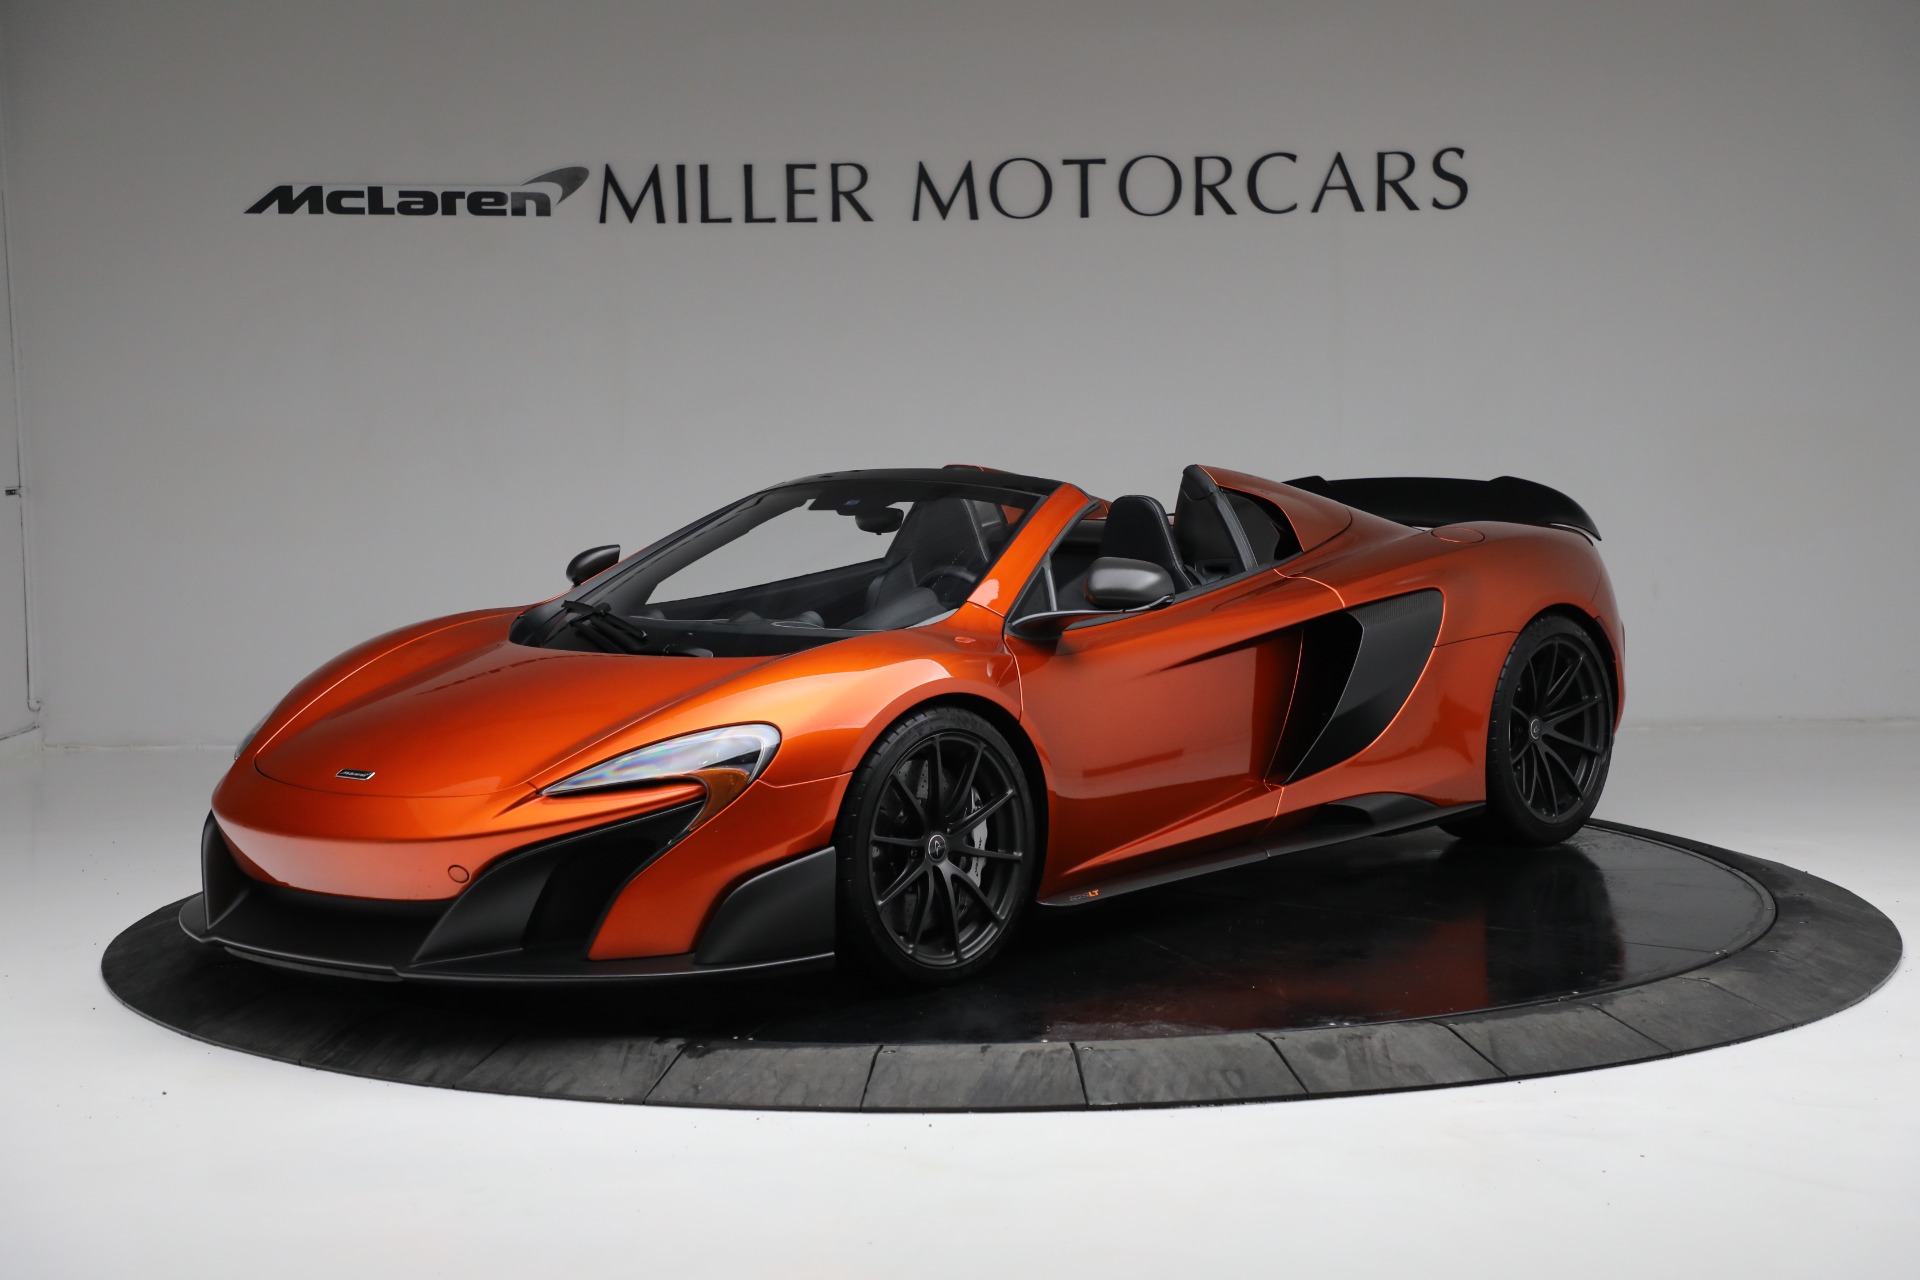 Used 2016 McLaren 675LT Spider for sale $284,900 at Bentley Greenwich in Greenwich CT 06830 1